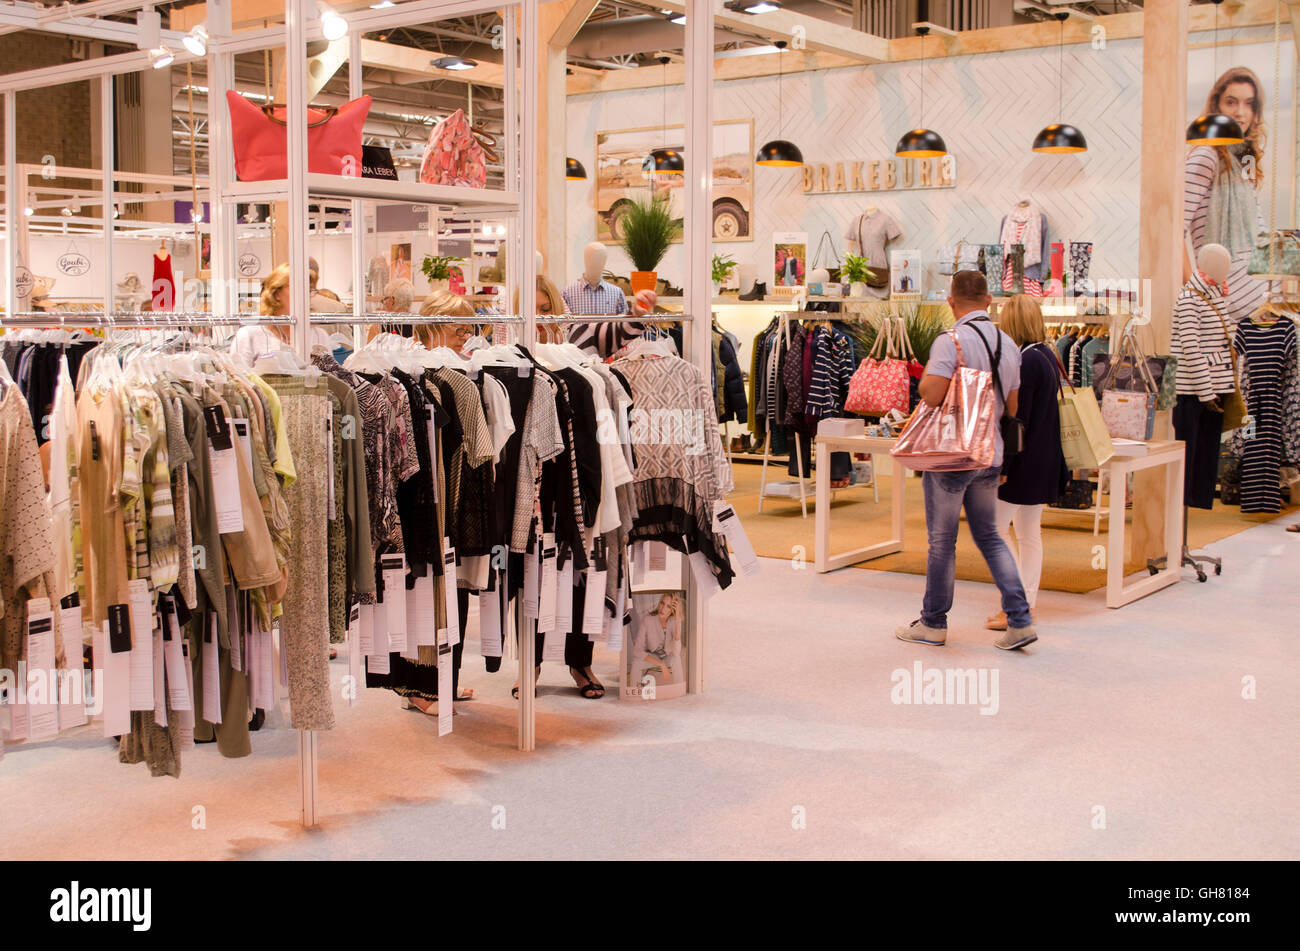 Fashion buyers browse the exhibition halls at Moda Spring Summer 2017, Birmingham NEC, UK. Moda, Britain's premier trade fashion exhibition, highlighted the Spring Summer 2017 ranges at Birmingham's NEC, 7th-9th August 2016. Featuring womenswear, lingerie, swimwear, footwear, accessories, and menswear, the exhibition reported good trade, with buyers visiting from across the UK. As well as the vast array of well over 1000 exhibitors showing their ranges to buyers, catwalk shows and business lectures ran throughout each day. Credit:  Antony Nettle/Alamy Live News Stock Photo